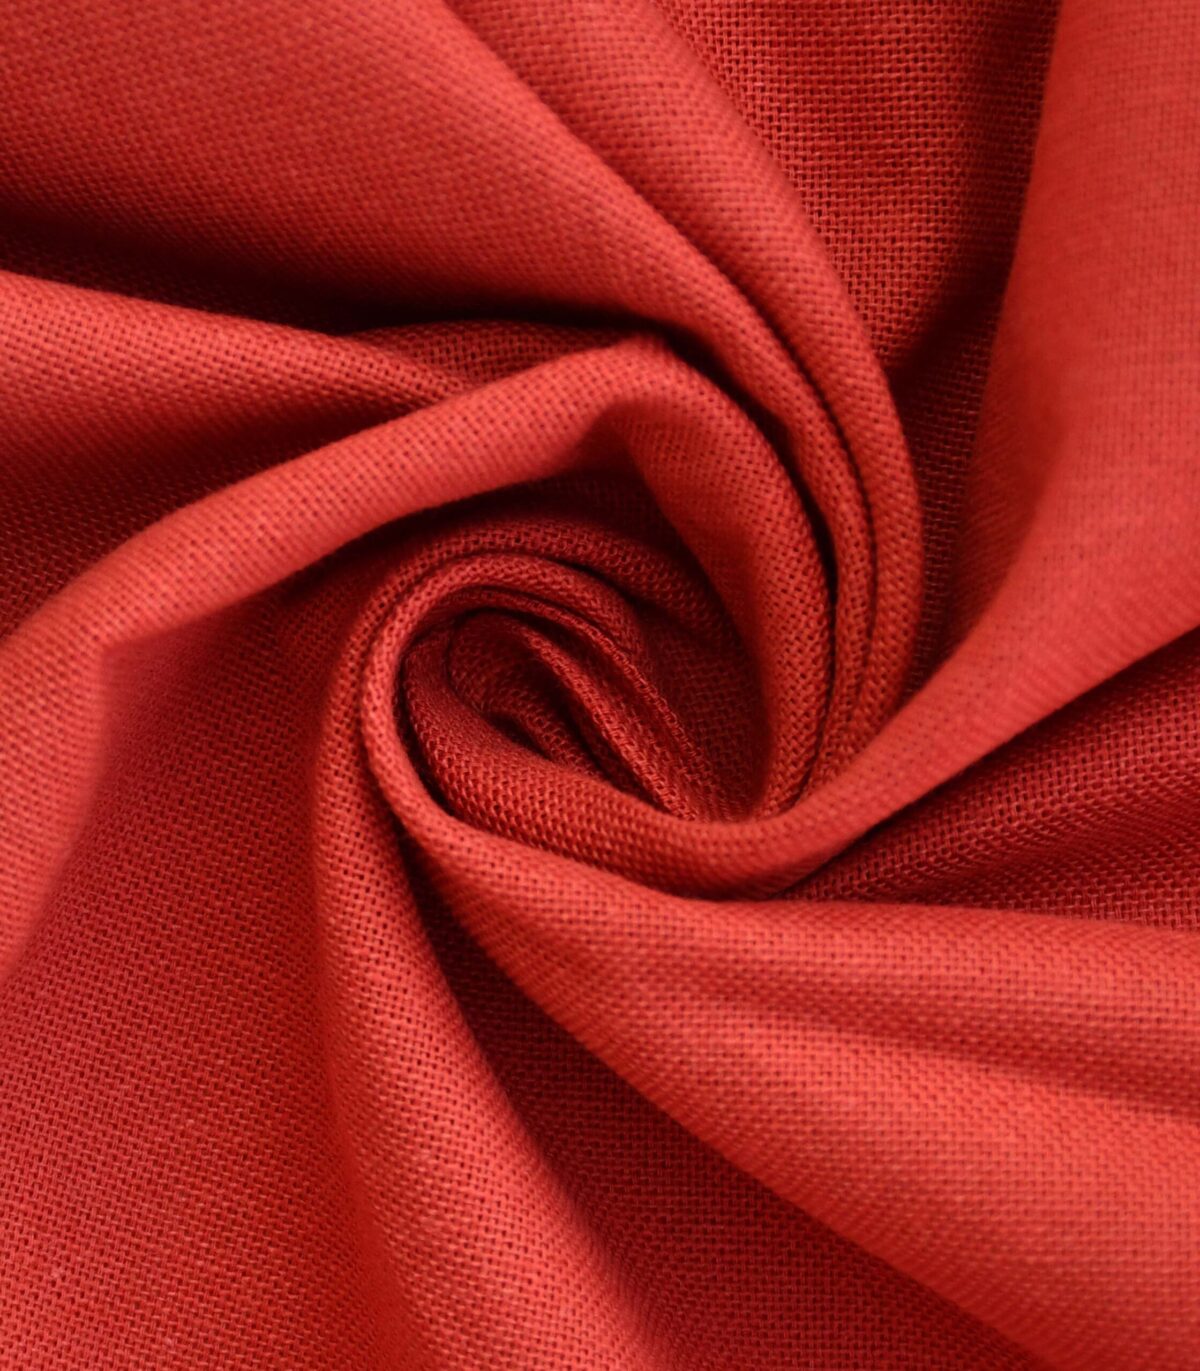 Cotton Light Red Dyed Oxford Fabric